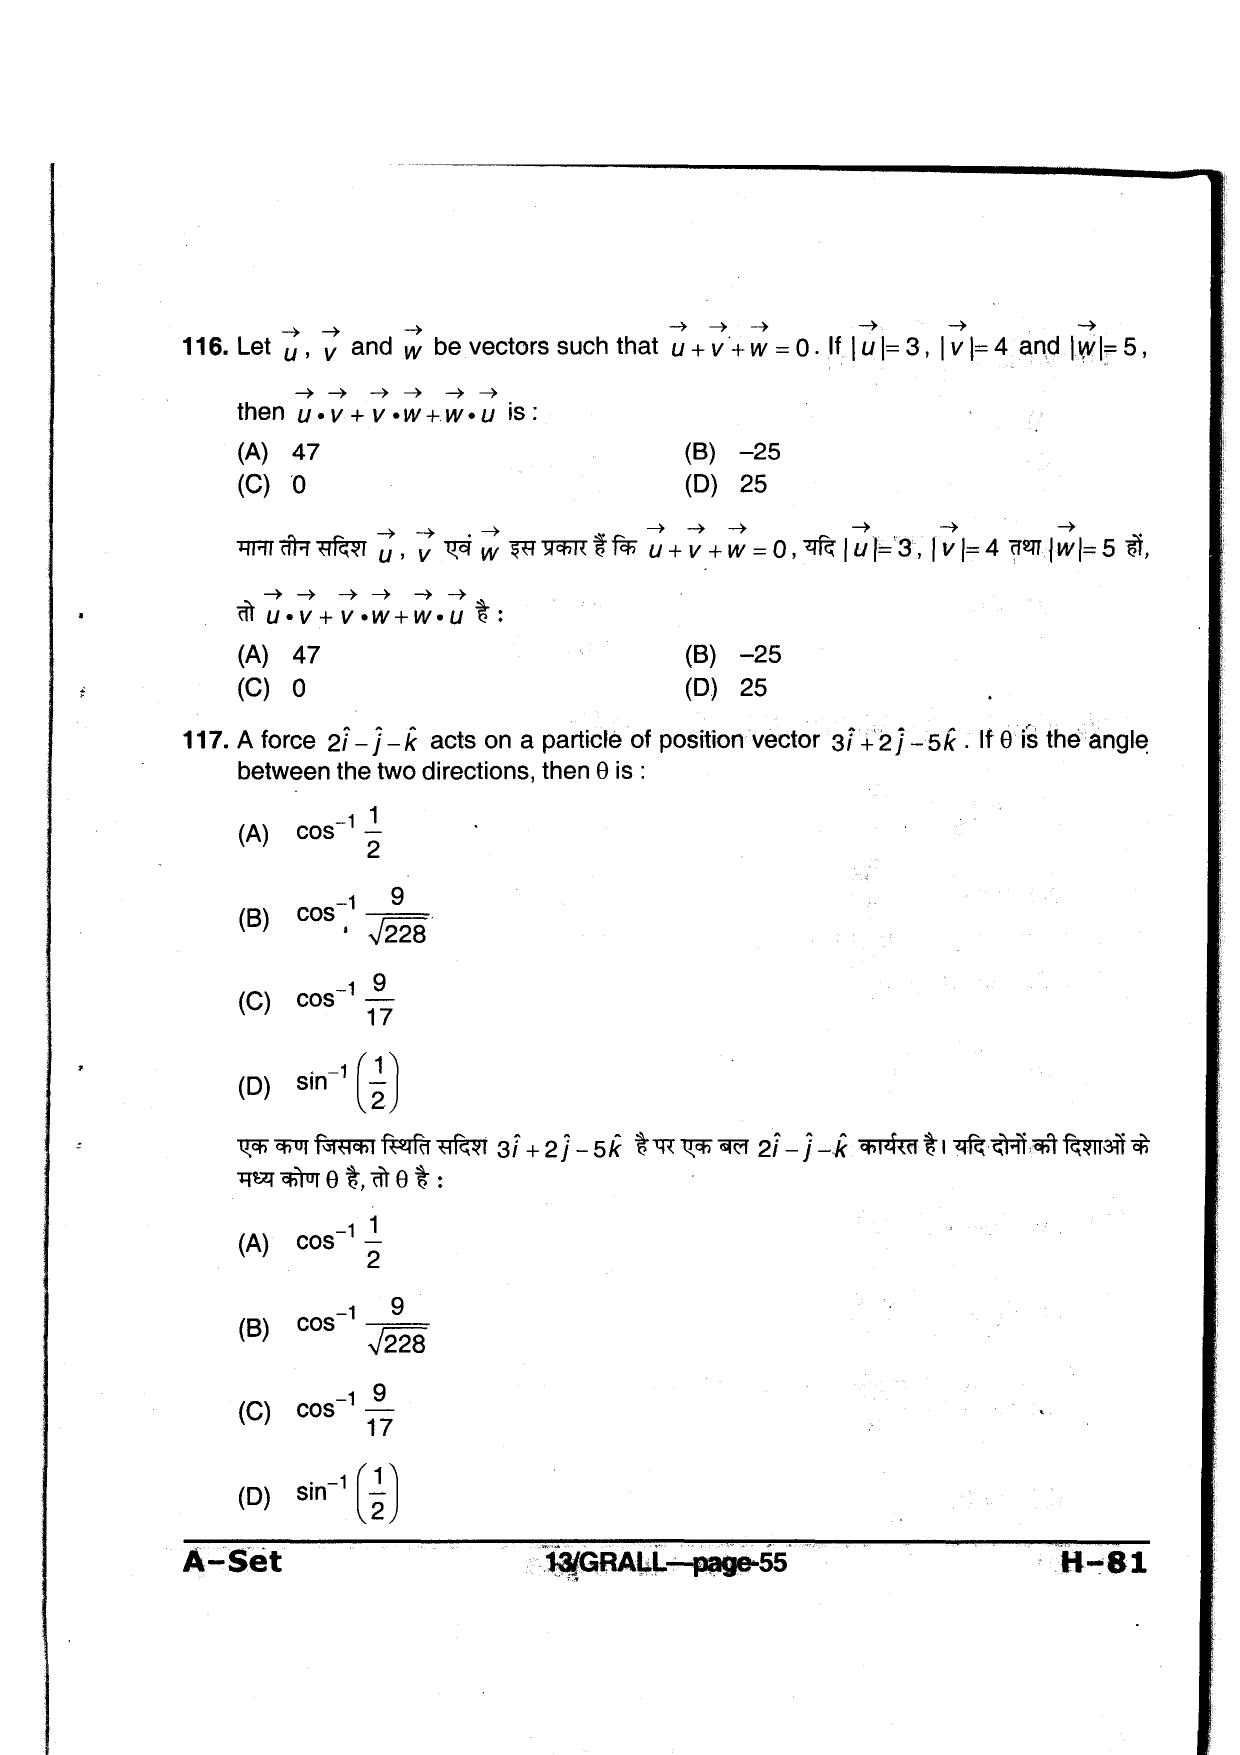 MP PAT 2013 Question Paper - Paper I - Page 55